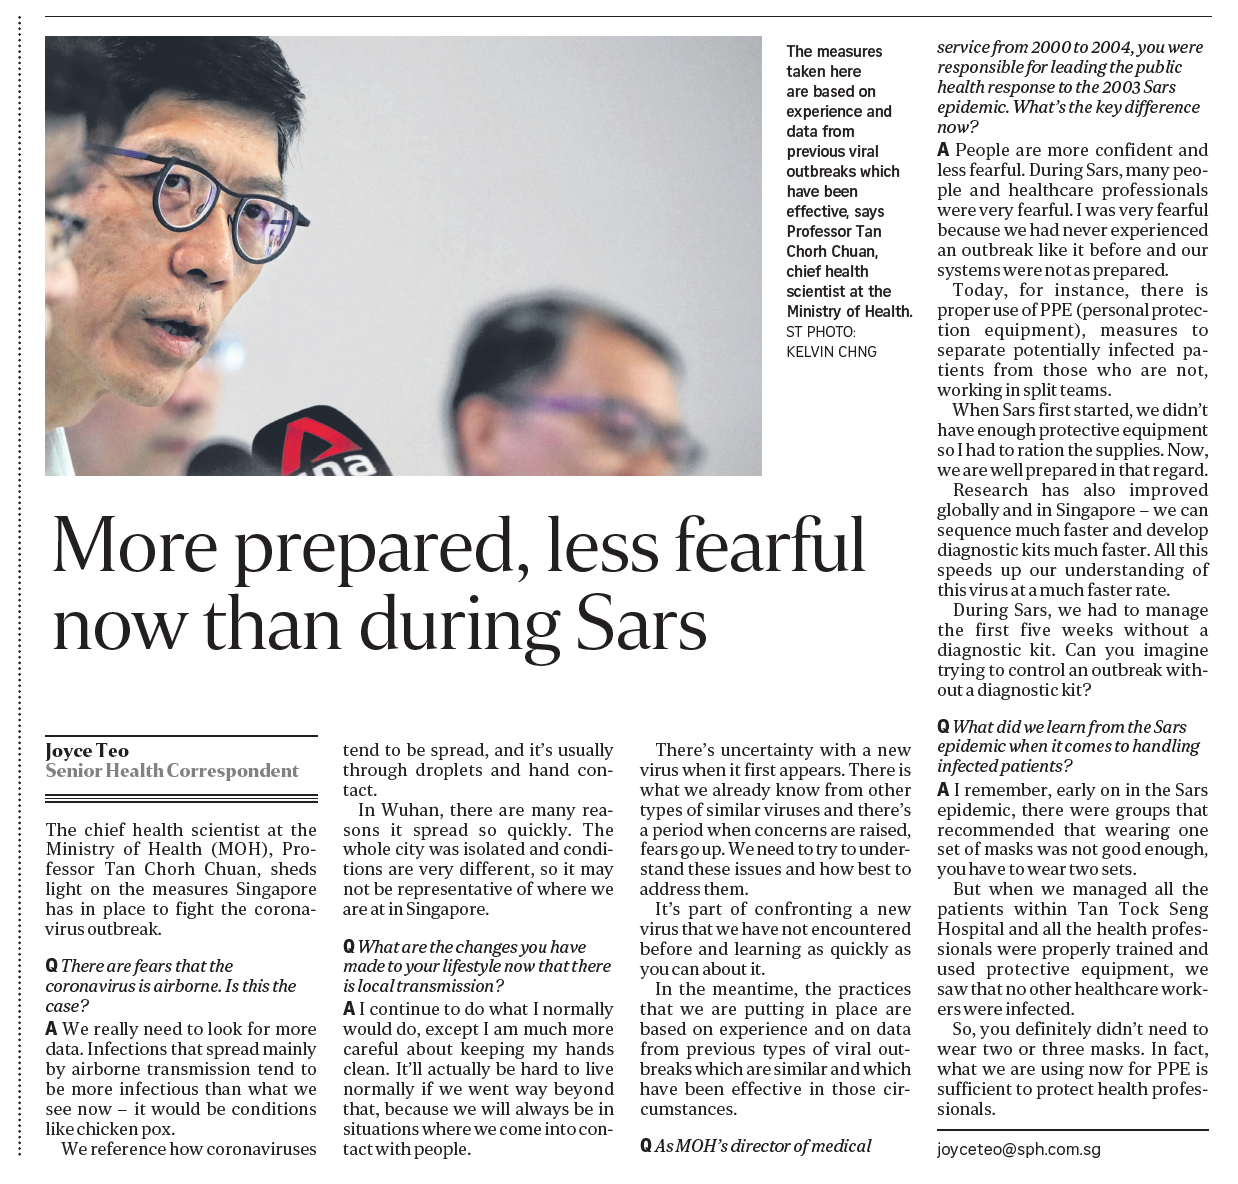 More prepared, less fearful now than during Sars (The Sunday Times, 16 Feb 2020, pB9)